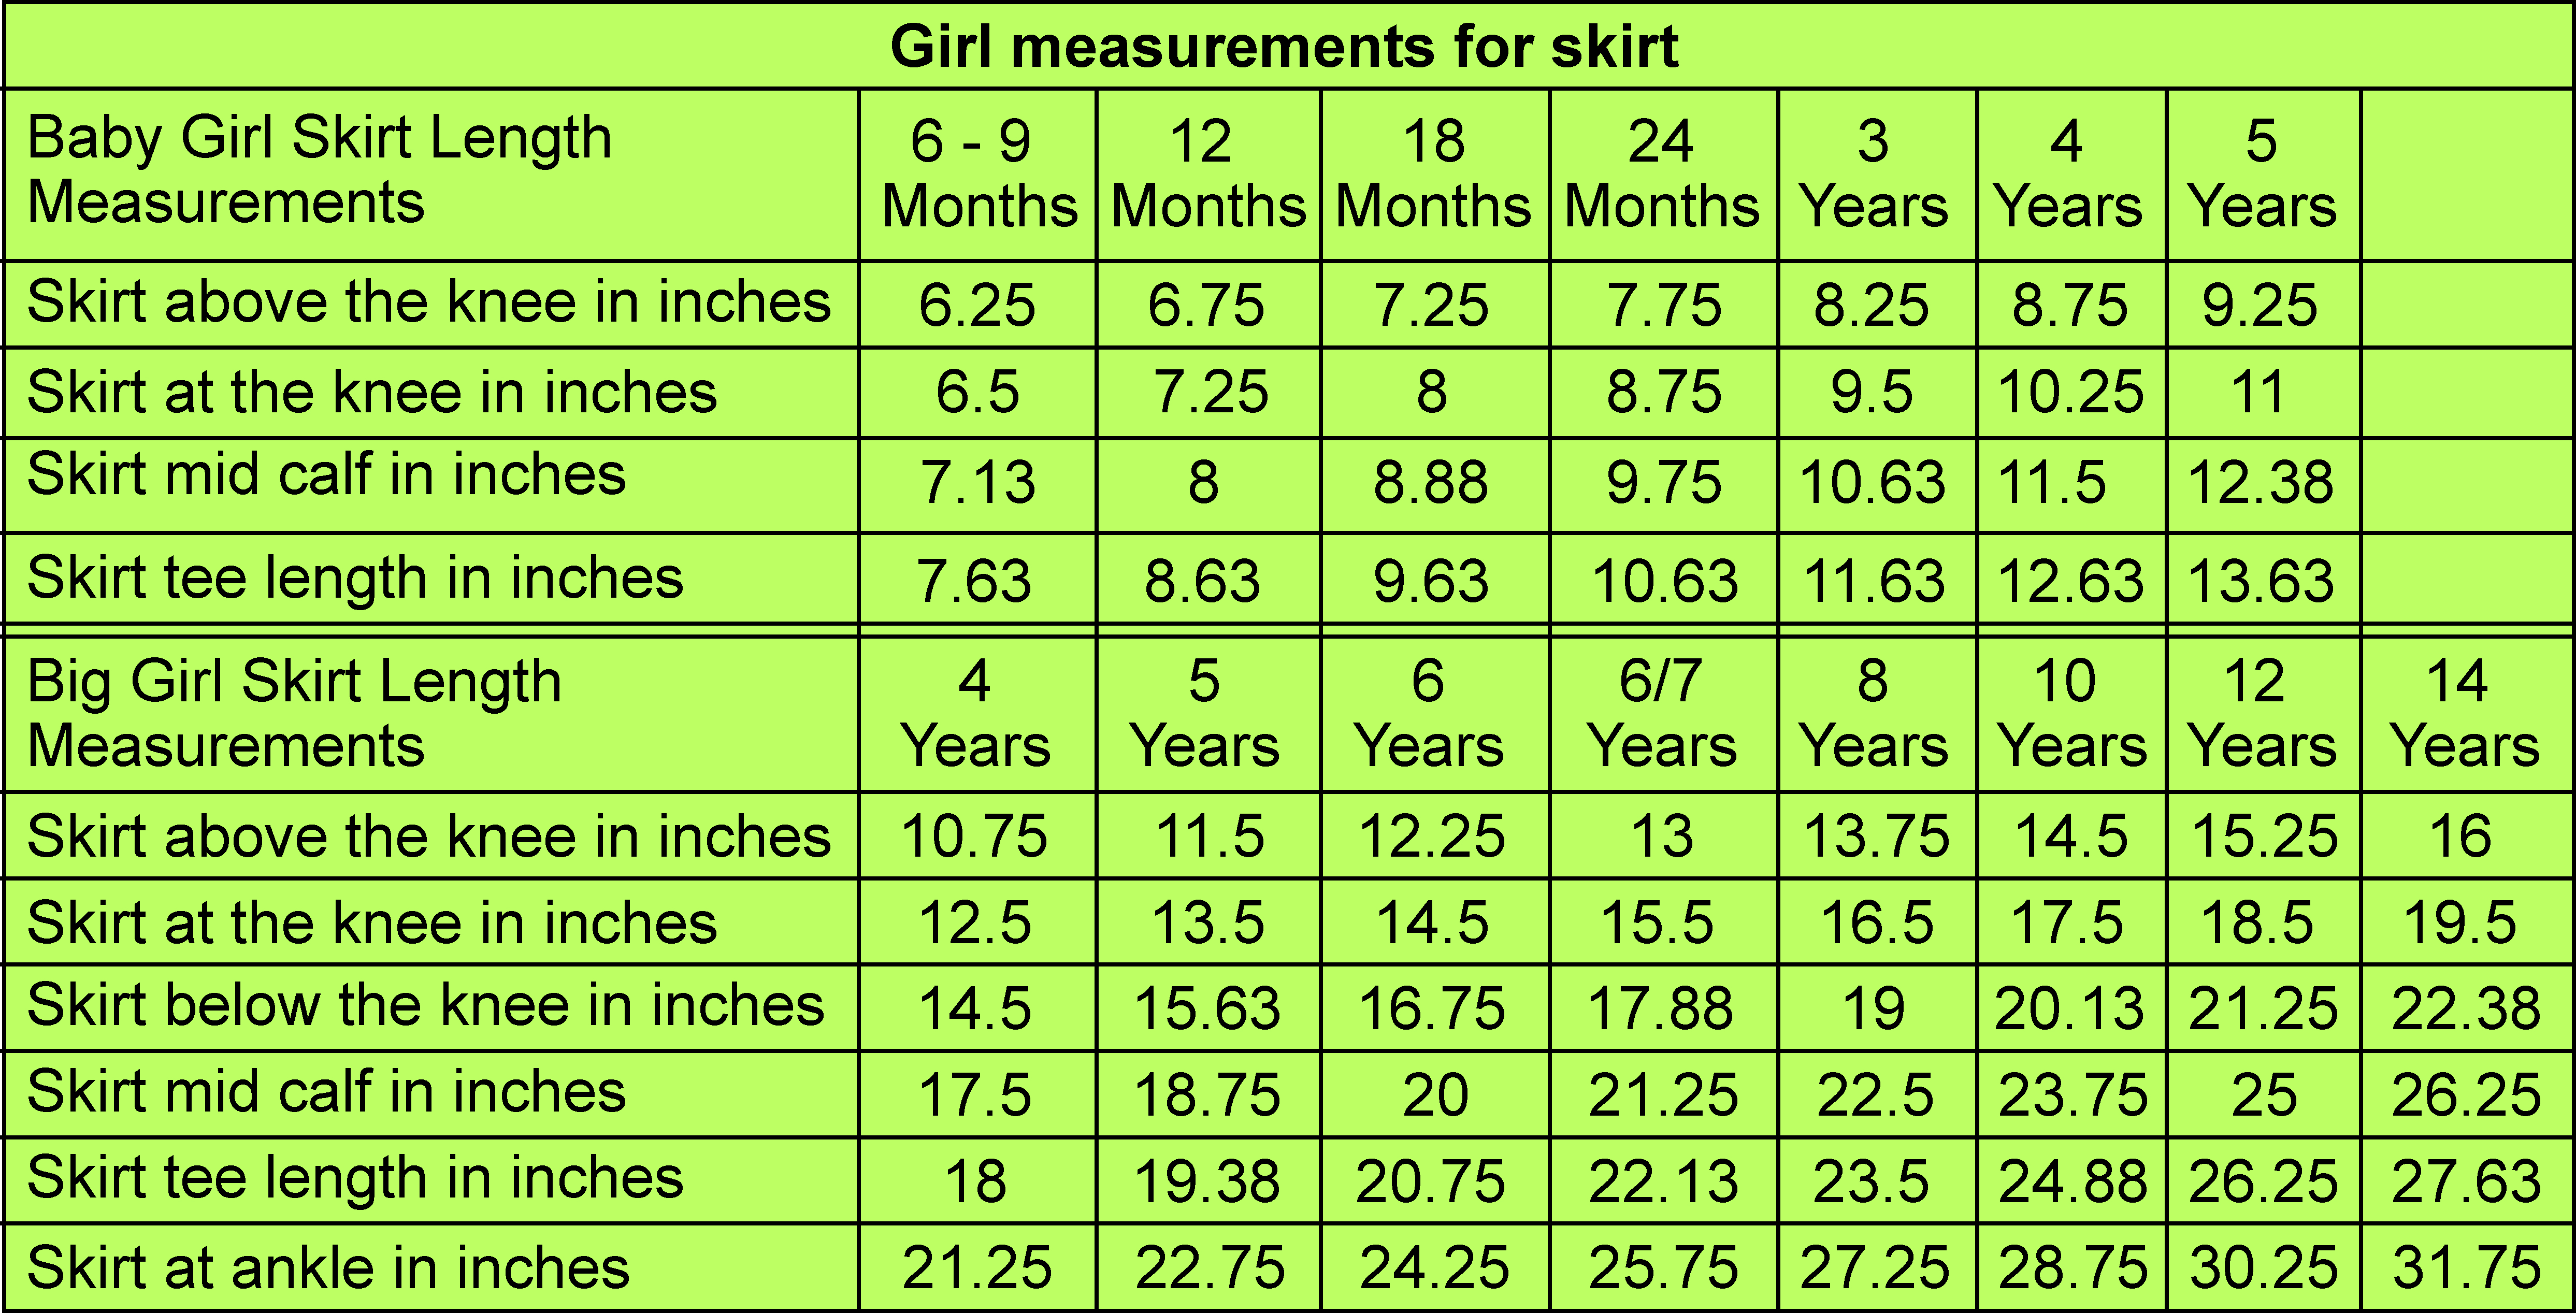 Measurements for girls skirts